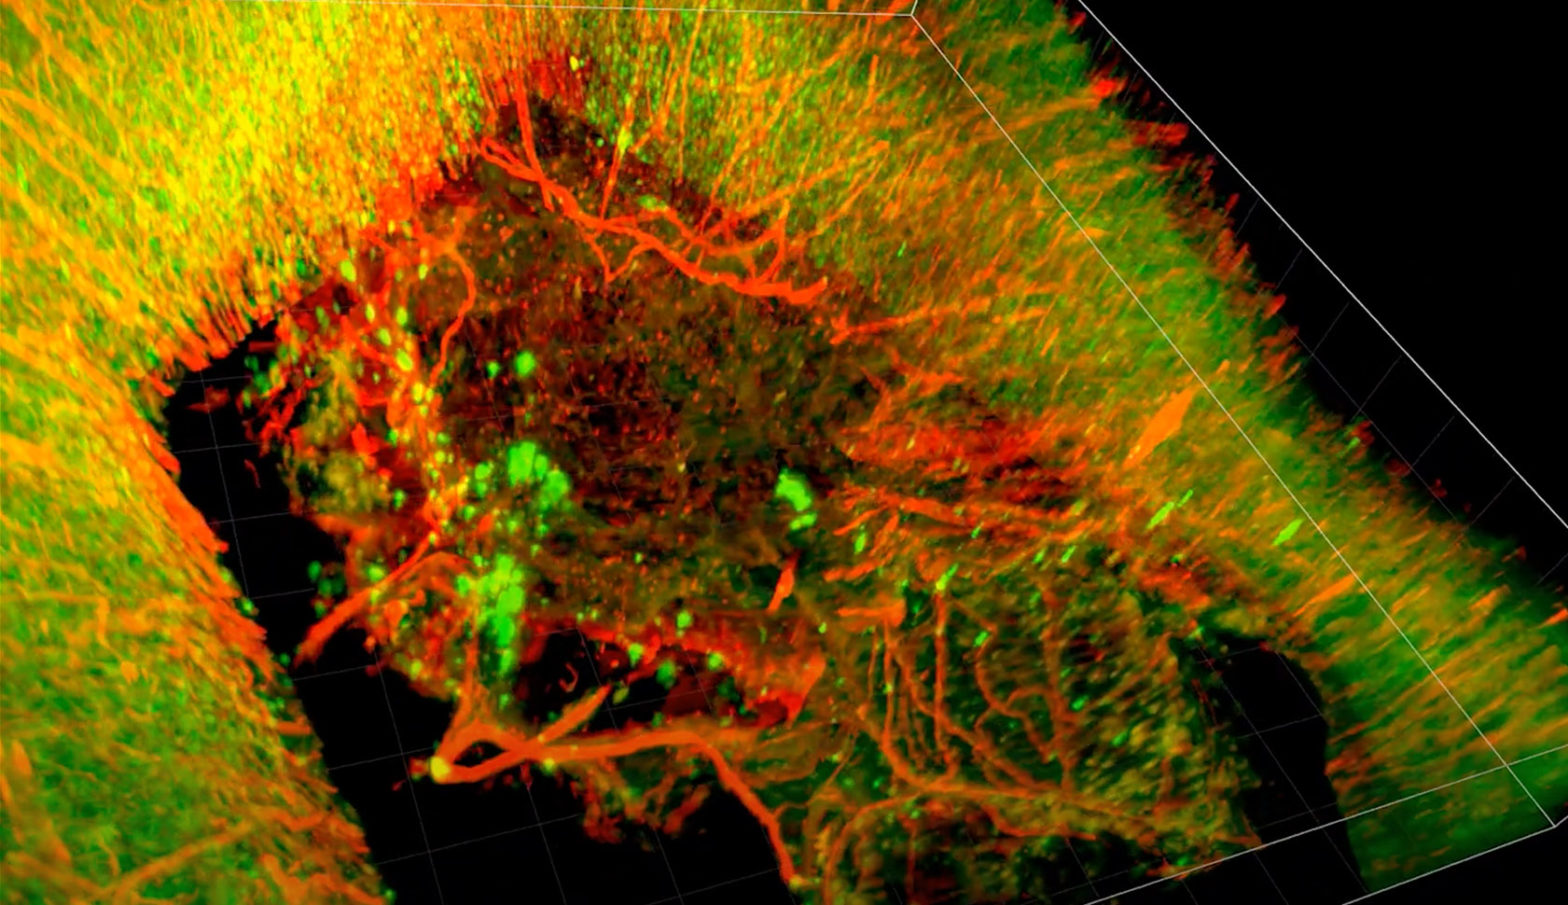 3D imagery of a rat brain treated with brain glue following severe traumatic brain injury